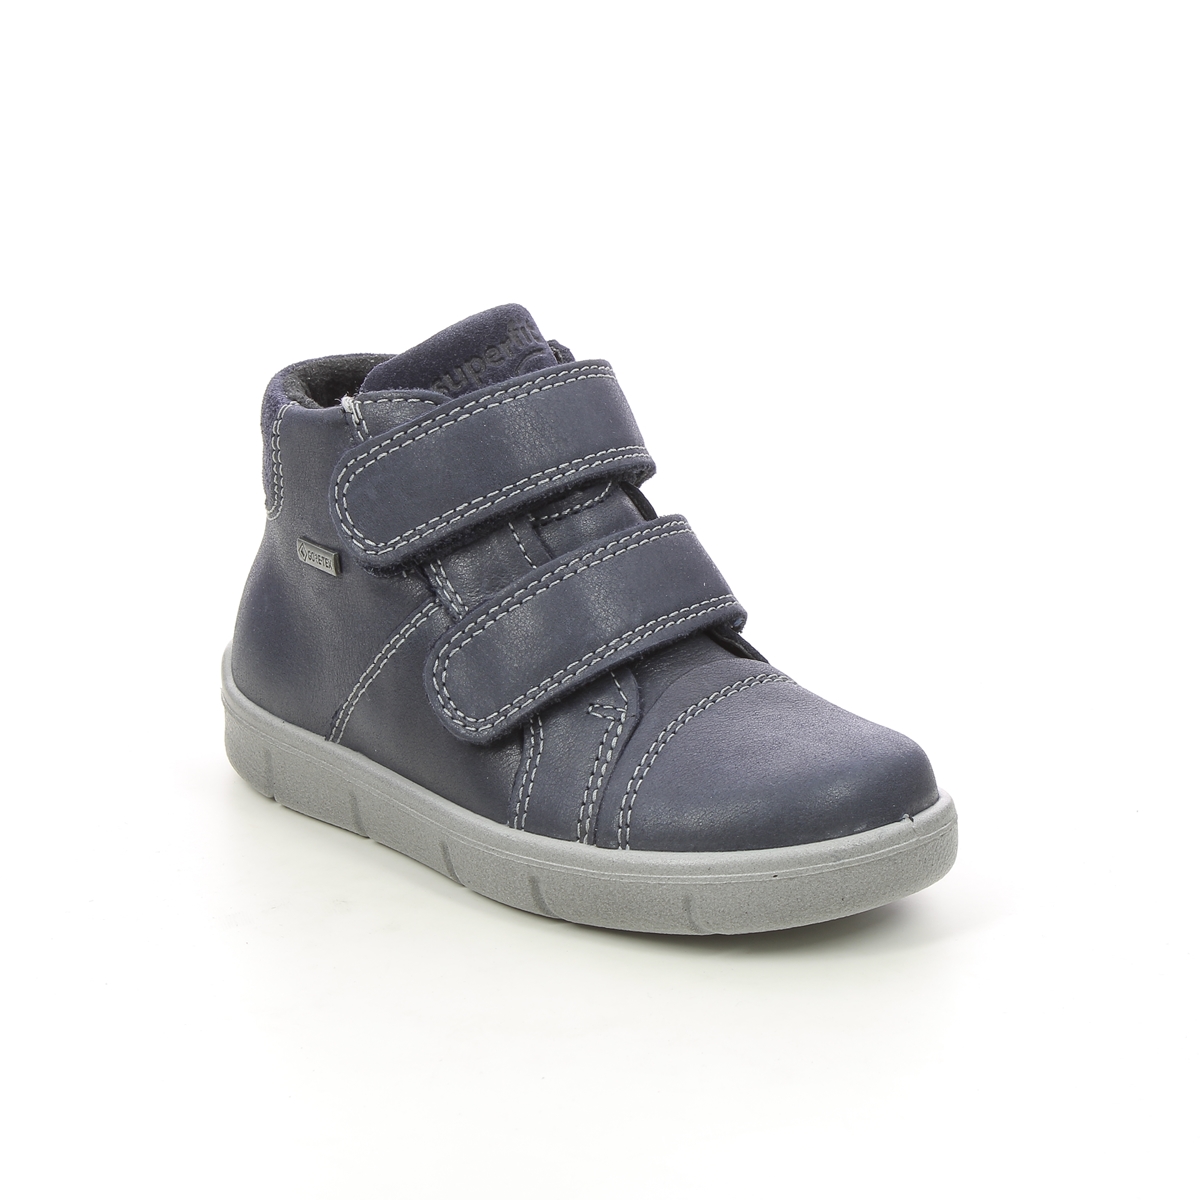 Superfit Ulli 2V Gtx Navy Leather Kids Toddler Boys Boots 0800423-8000 In Size 26 In Plain Navy Leather